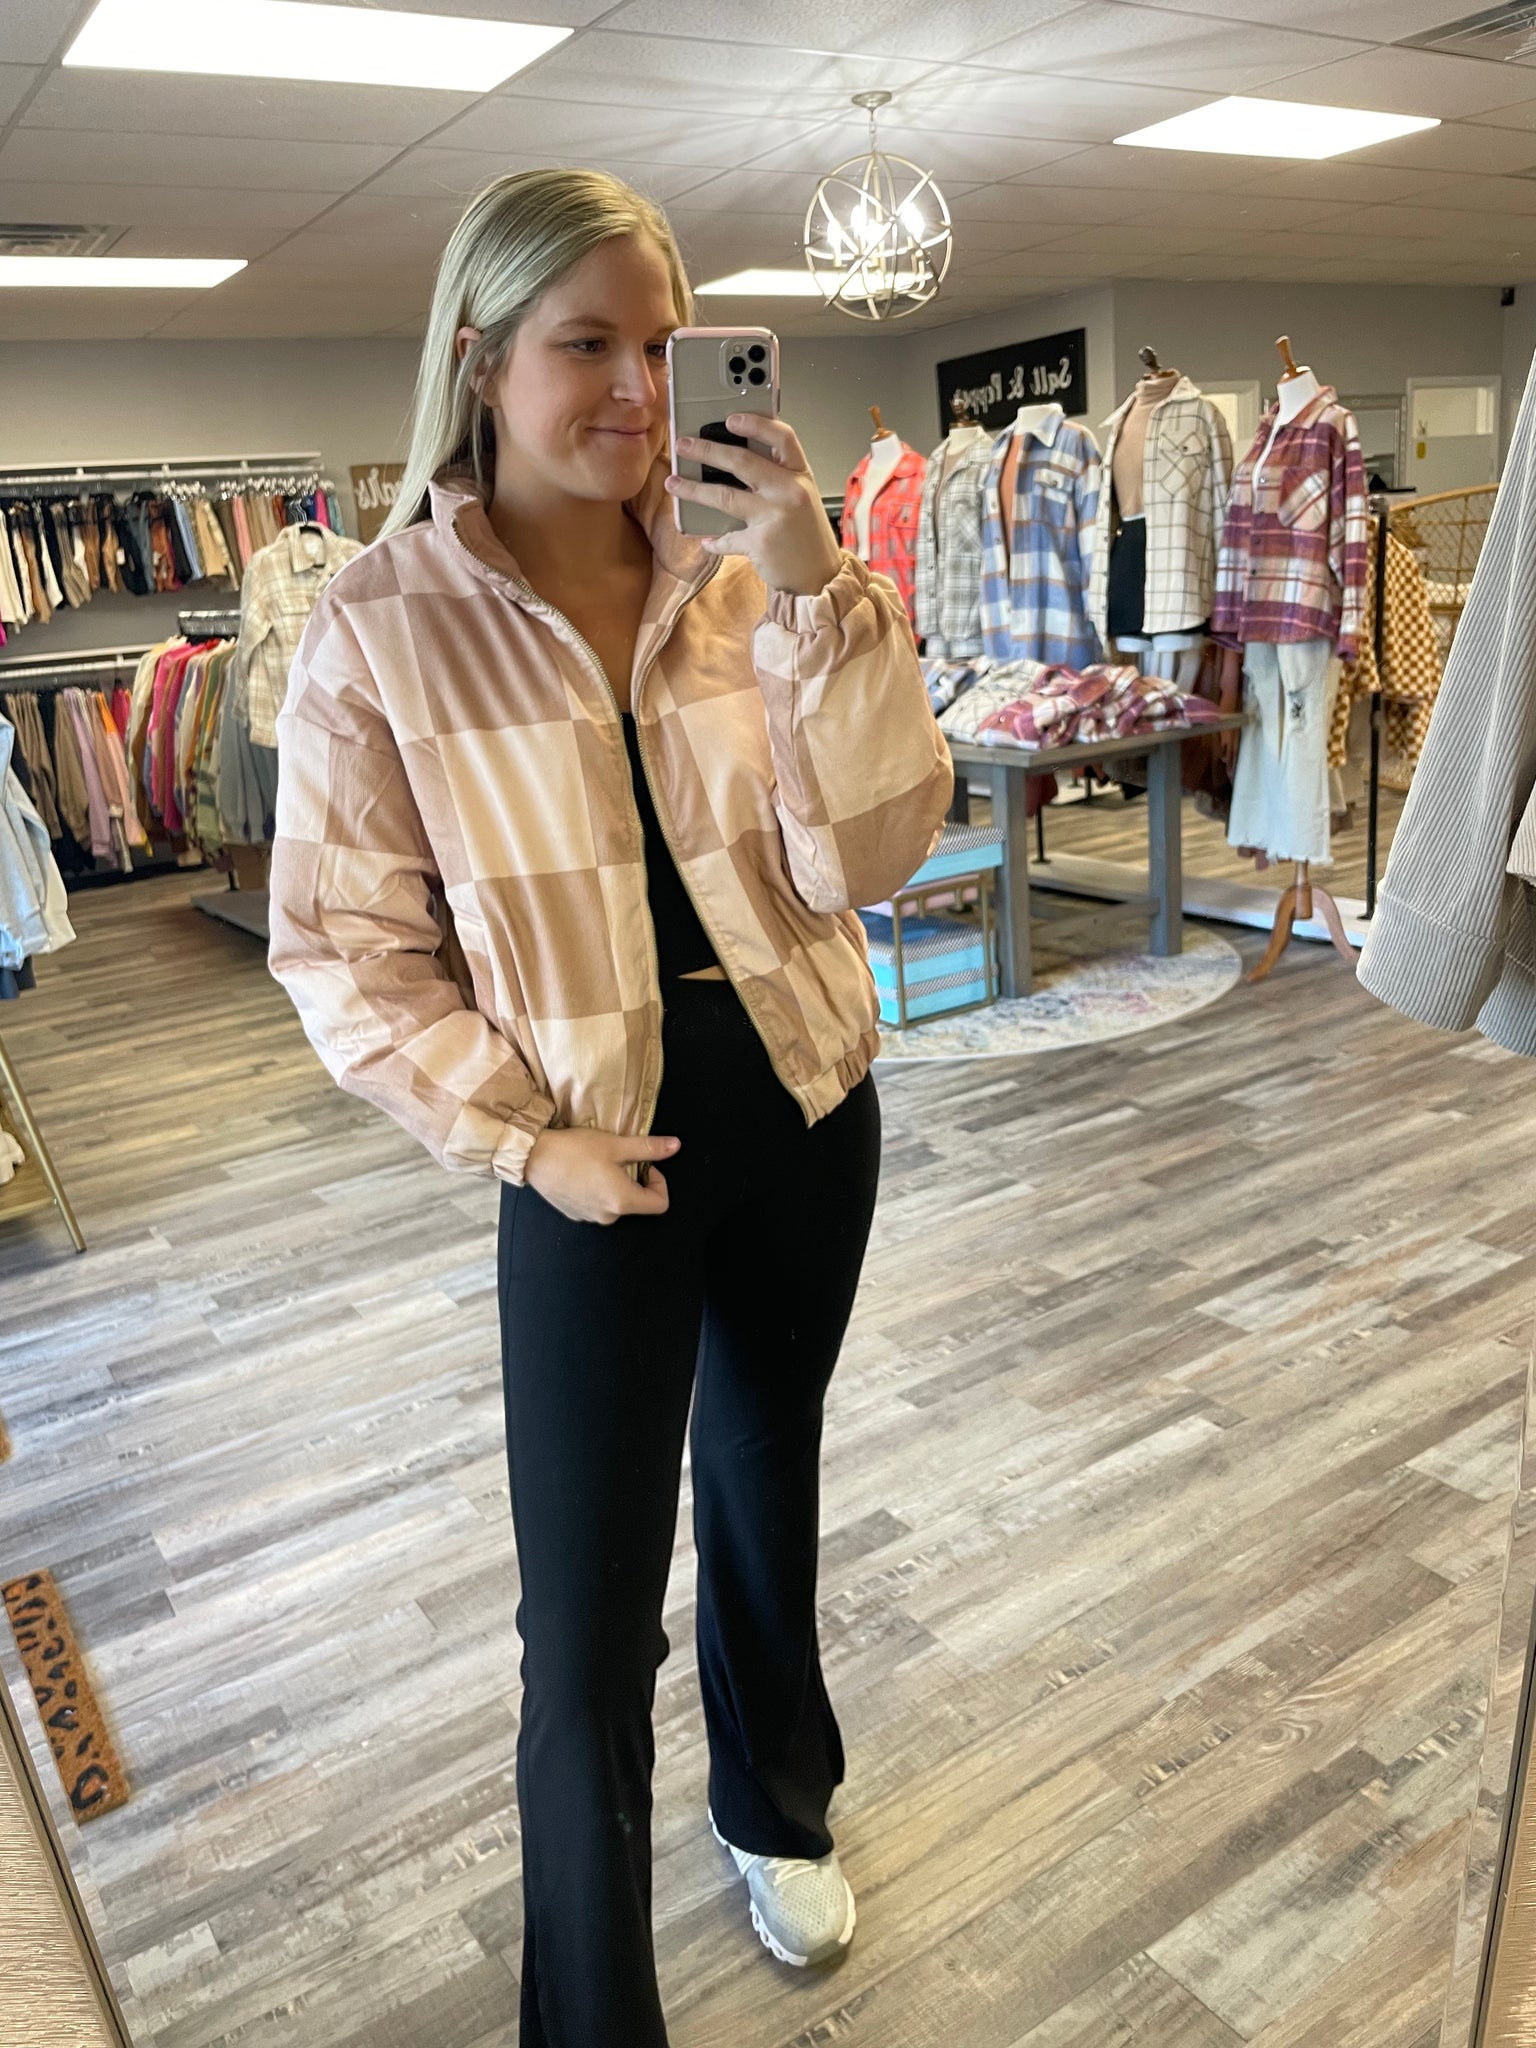 Checkered Jacket - Taupe Multi